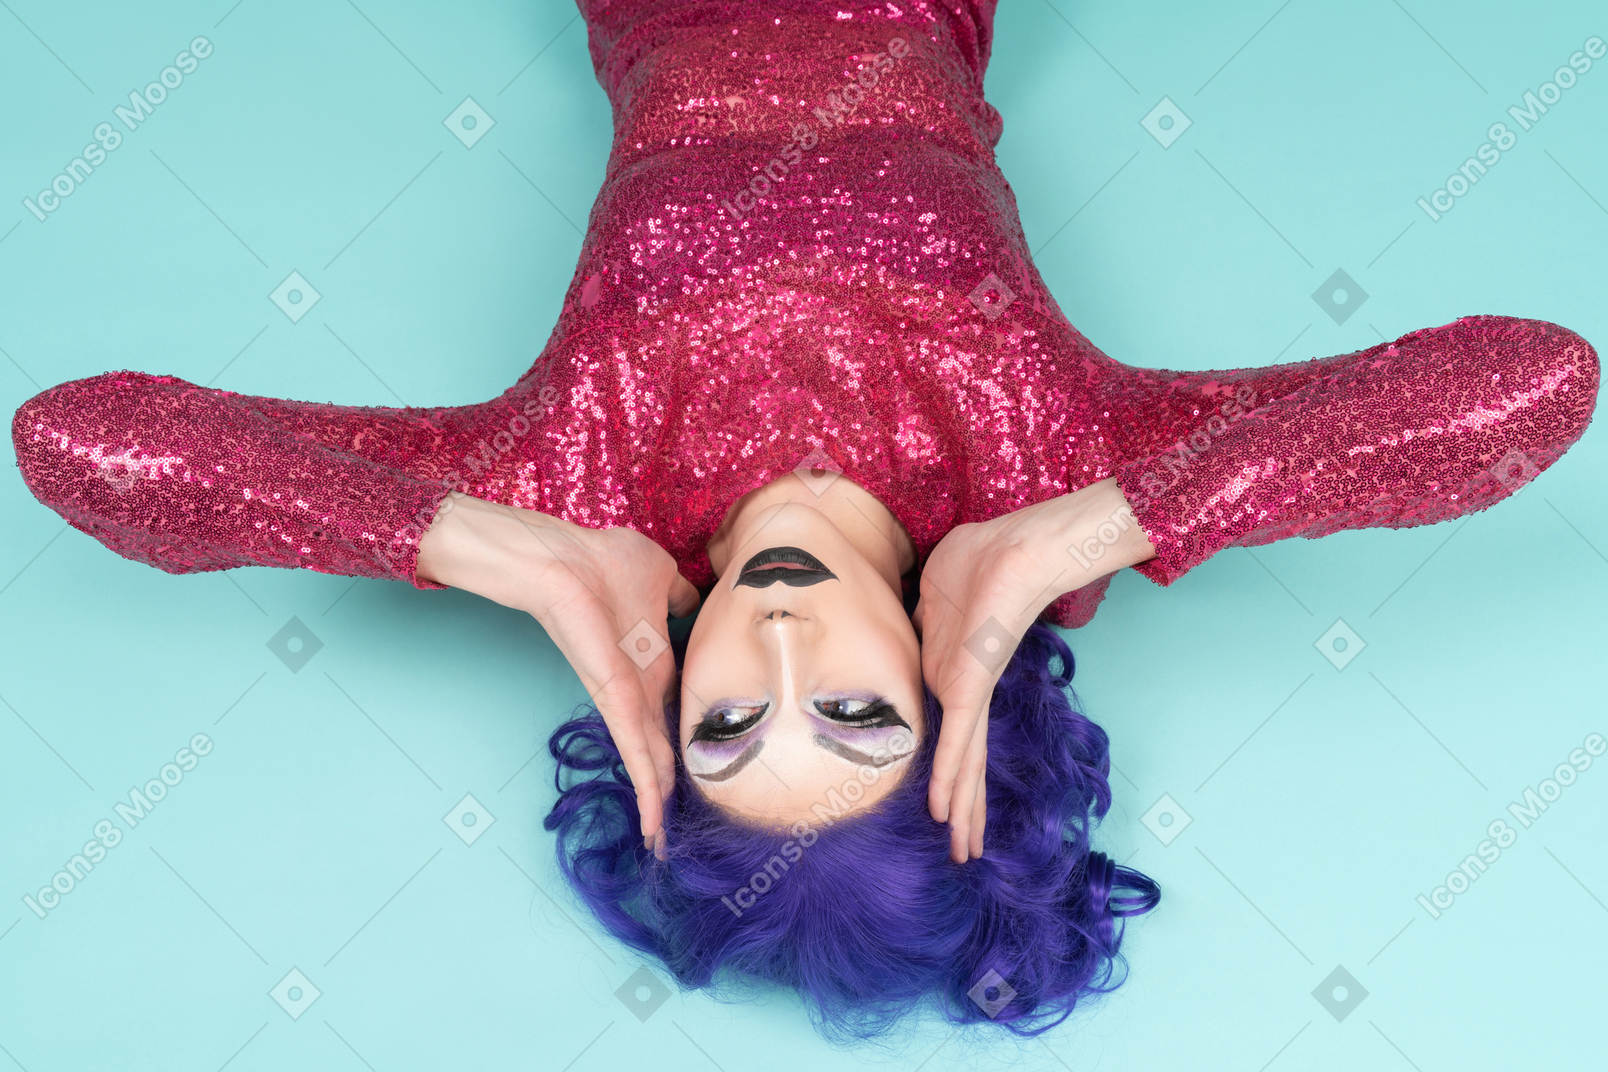 Drag queen in pink dress lying on the floor & holding their face